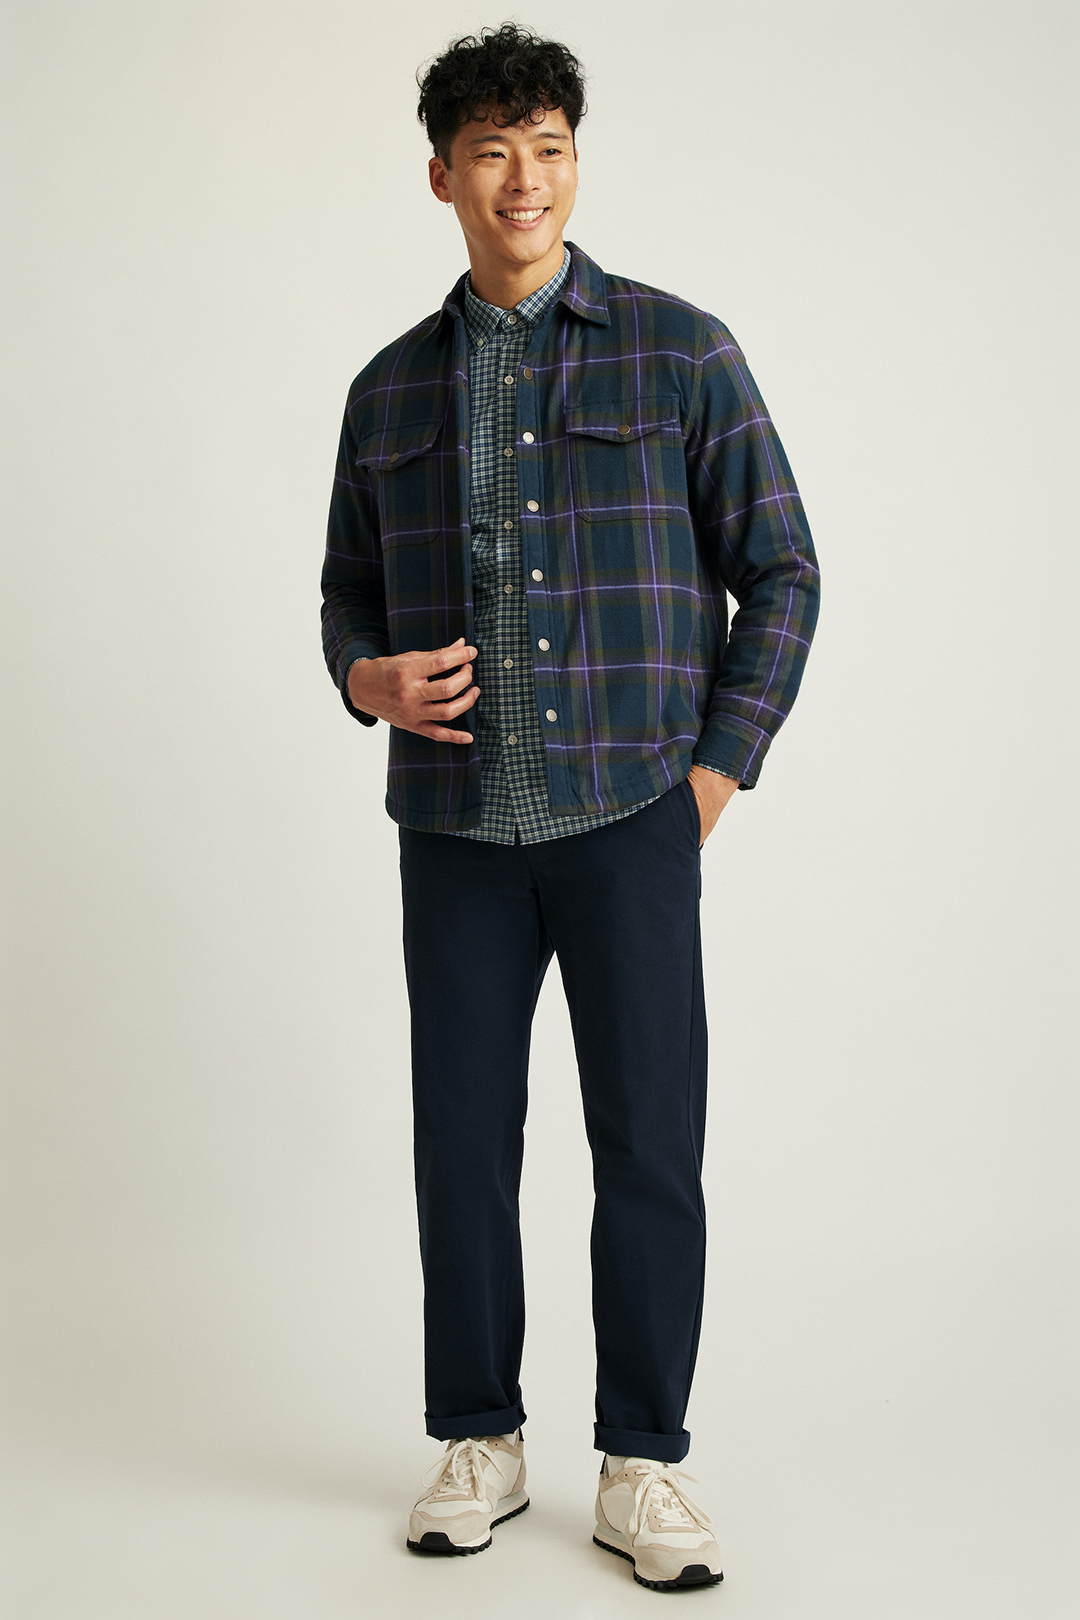 Navy violet plaid overshirt, white and blue button-down shirt, navy chinos, and beige sneakers outfit